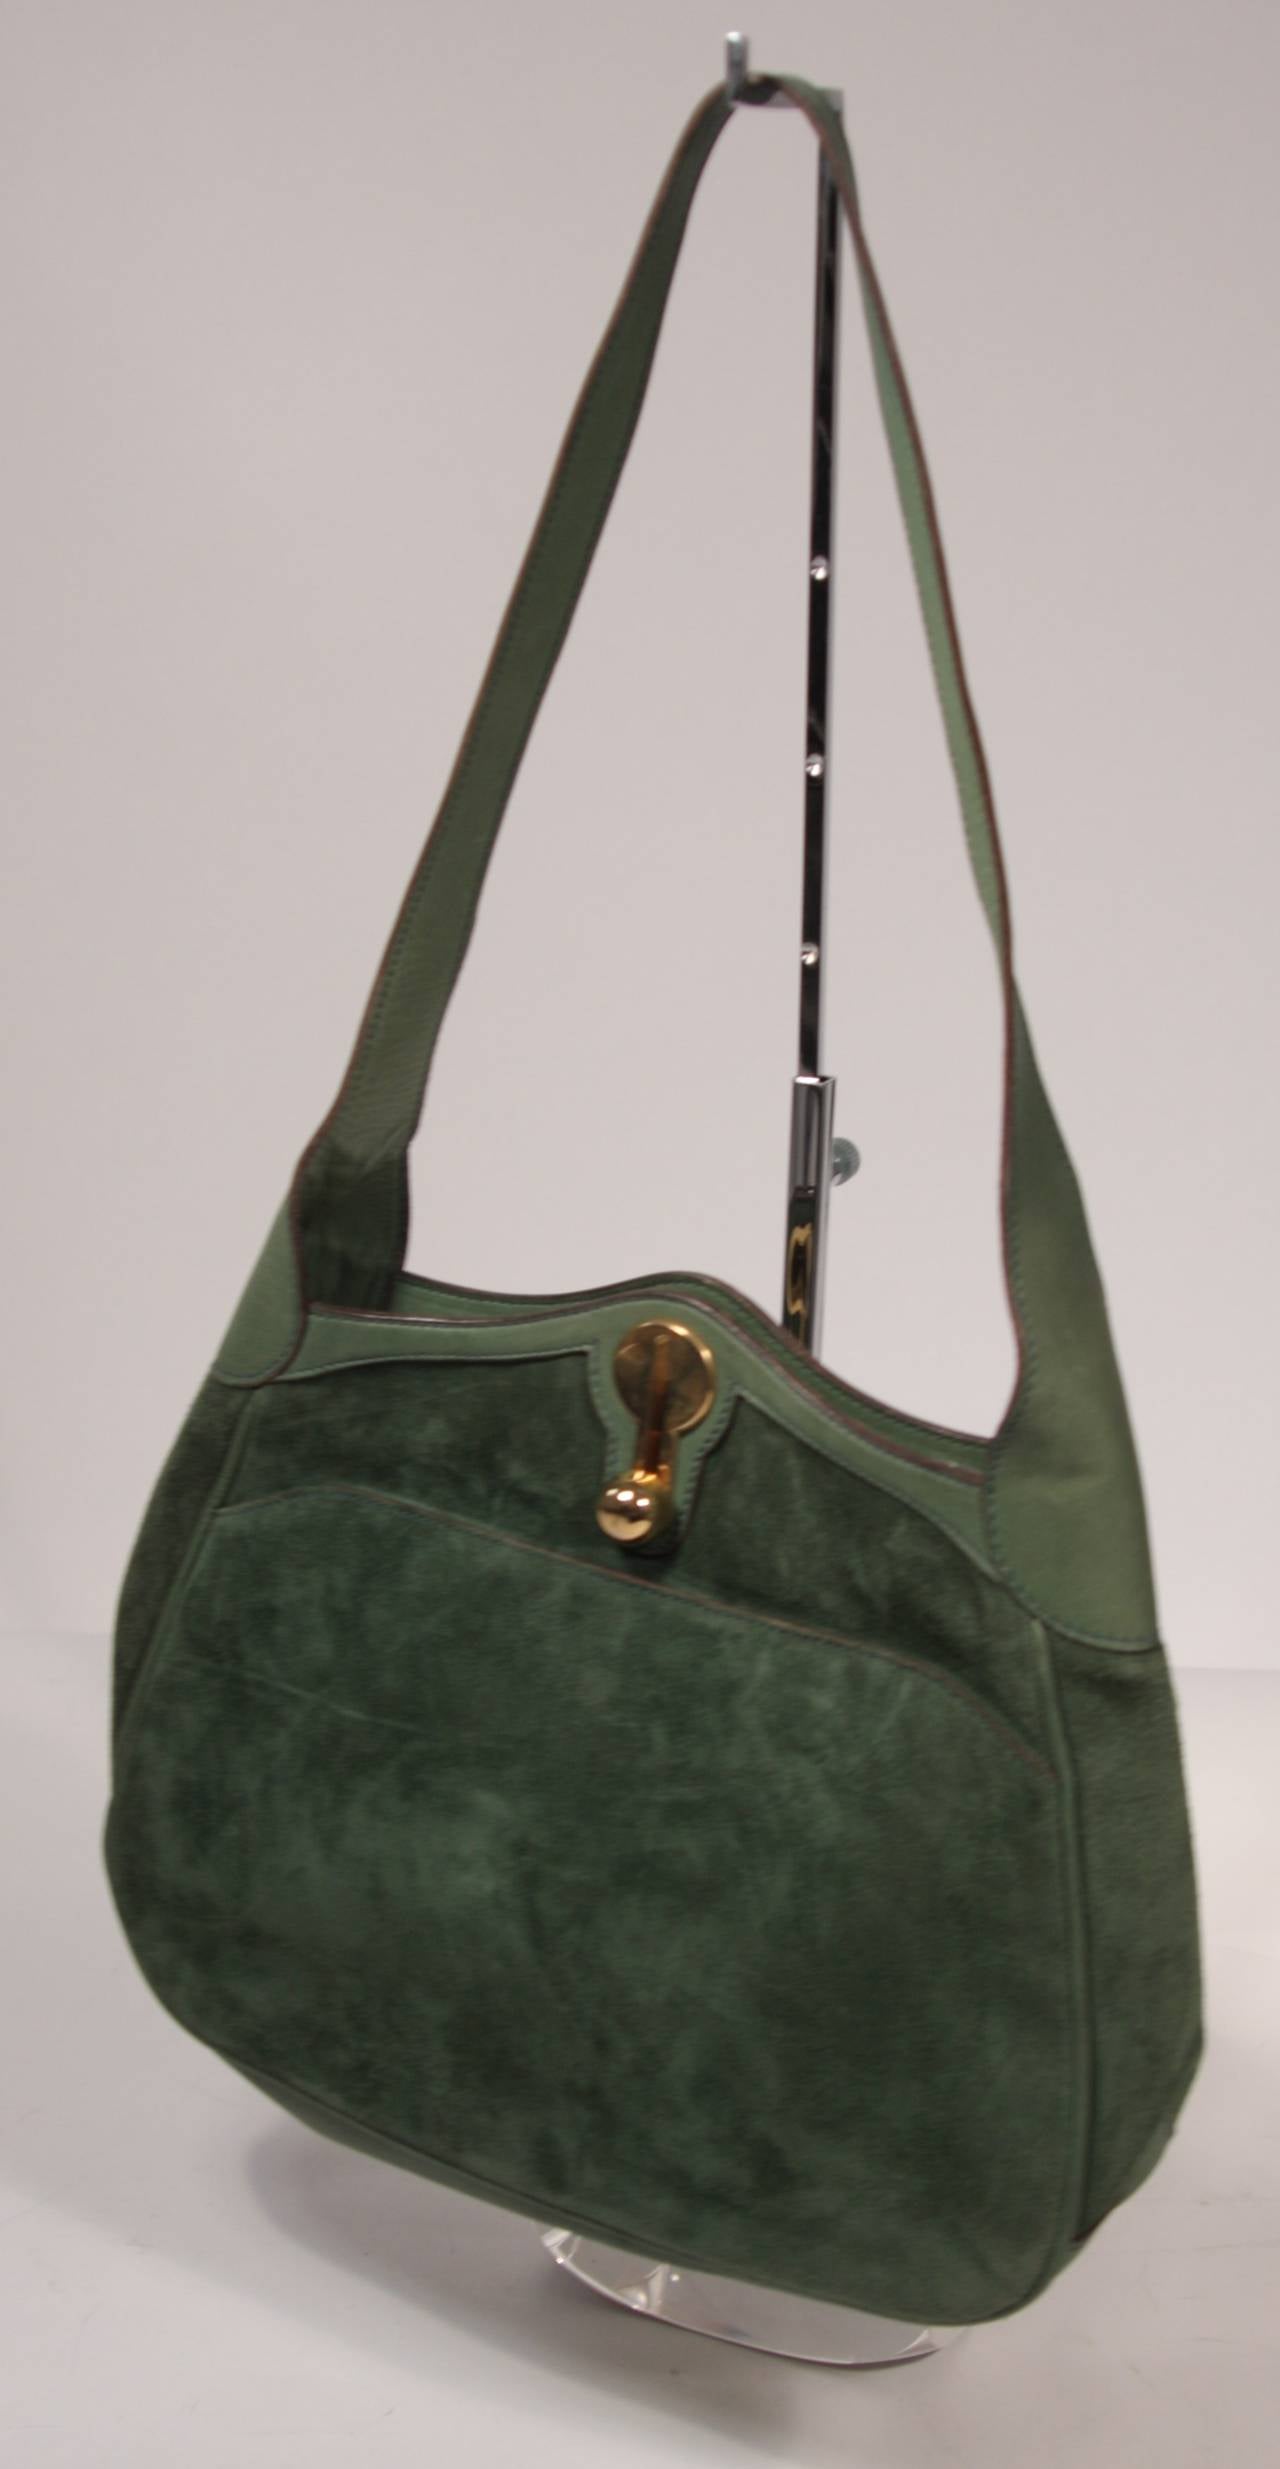 This is a Gucci vintage handbag. The hobo style purse is composed of a green leather and suede. There is a gold ball slide closure. The handbag is in excellent condition and practically unused, the only wear is due to age. 

Measures